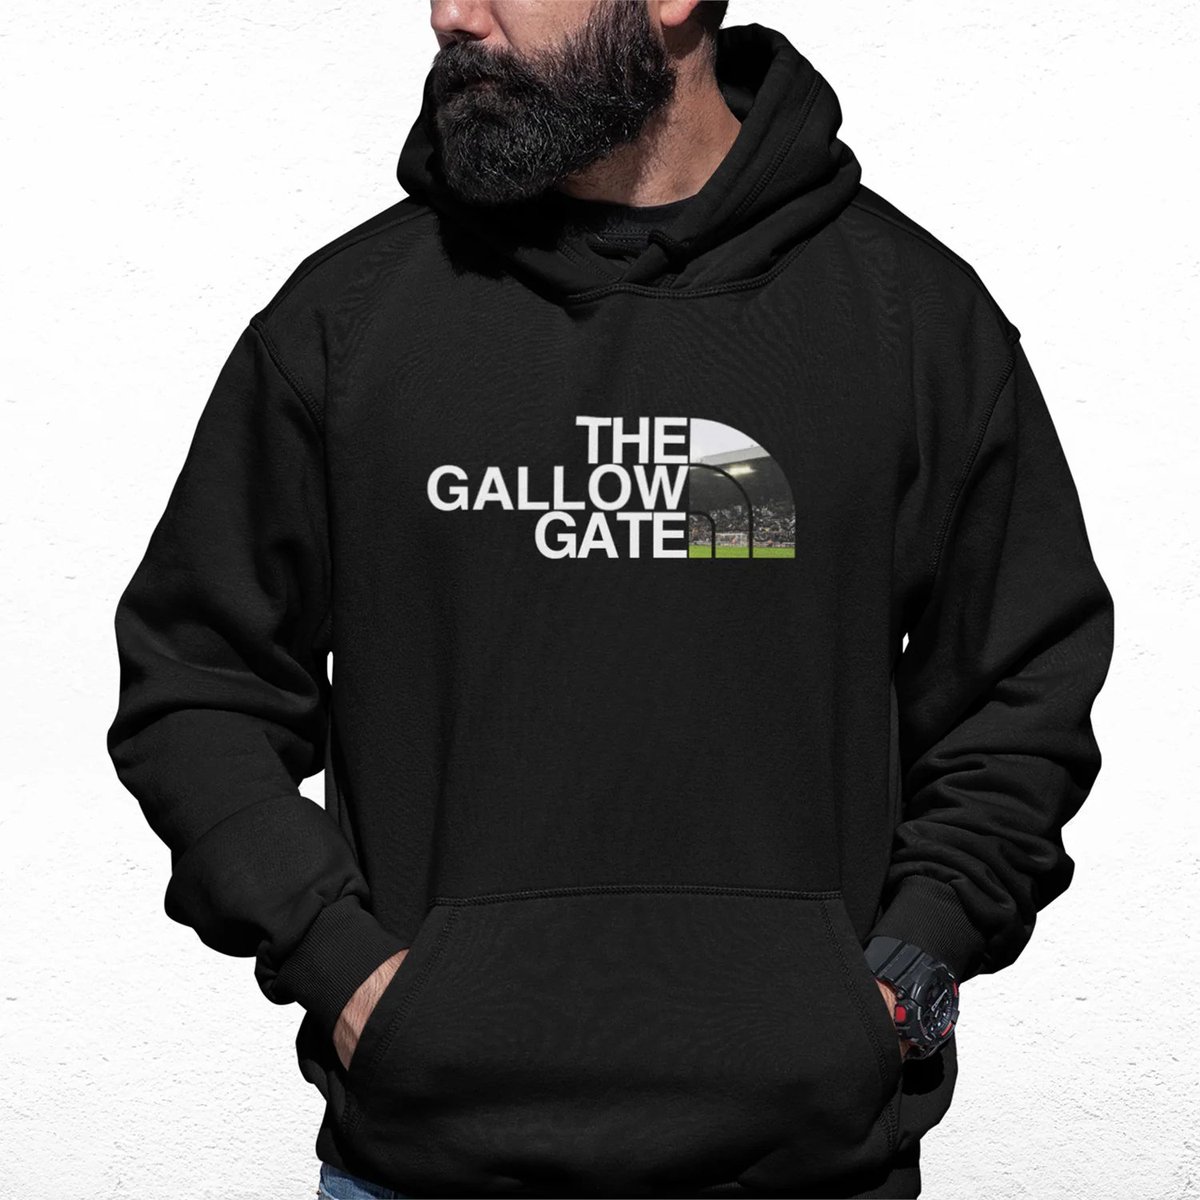 Inspired by the most iconic and famous stand at St James' Park, The Gallowgate. This hoodie pays homage to the home of the Geordies and the fans which make The Gallowgate so great 🖤🤍 We've restocked 30+ hoodies today 👉 toonarmy.com/shop/product/t… #NUFC